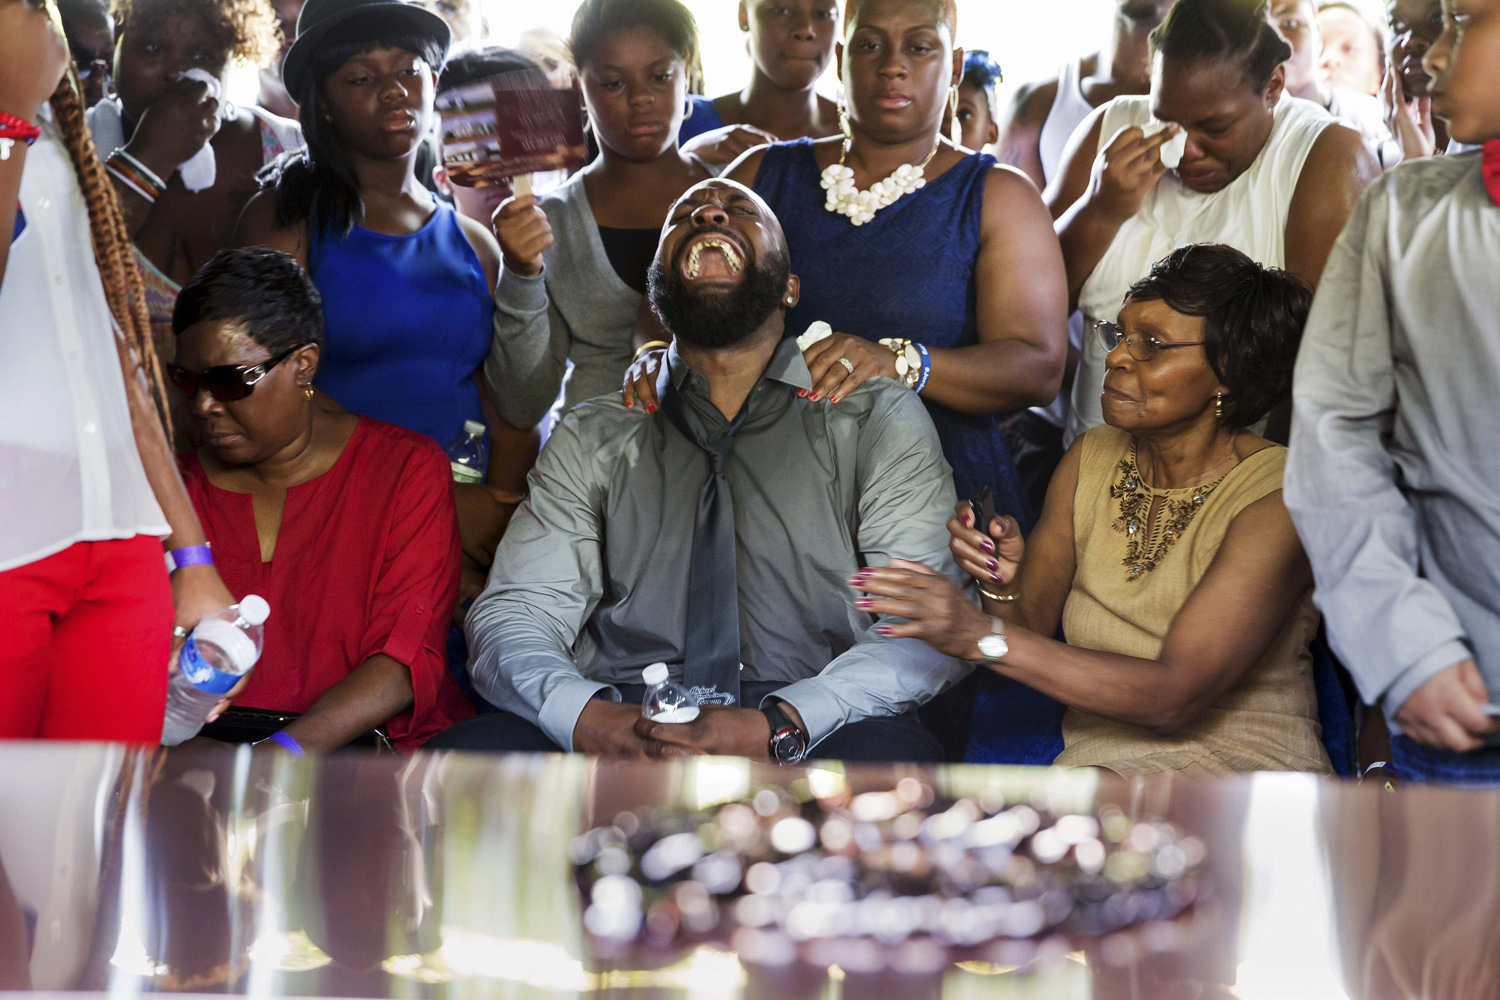 Michael Brown Sr. yells out as his son's casket is lowered into the ground at St. Peter's Cemetery in St. Louis